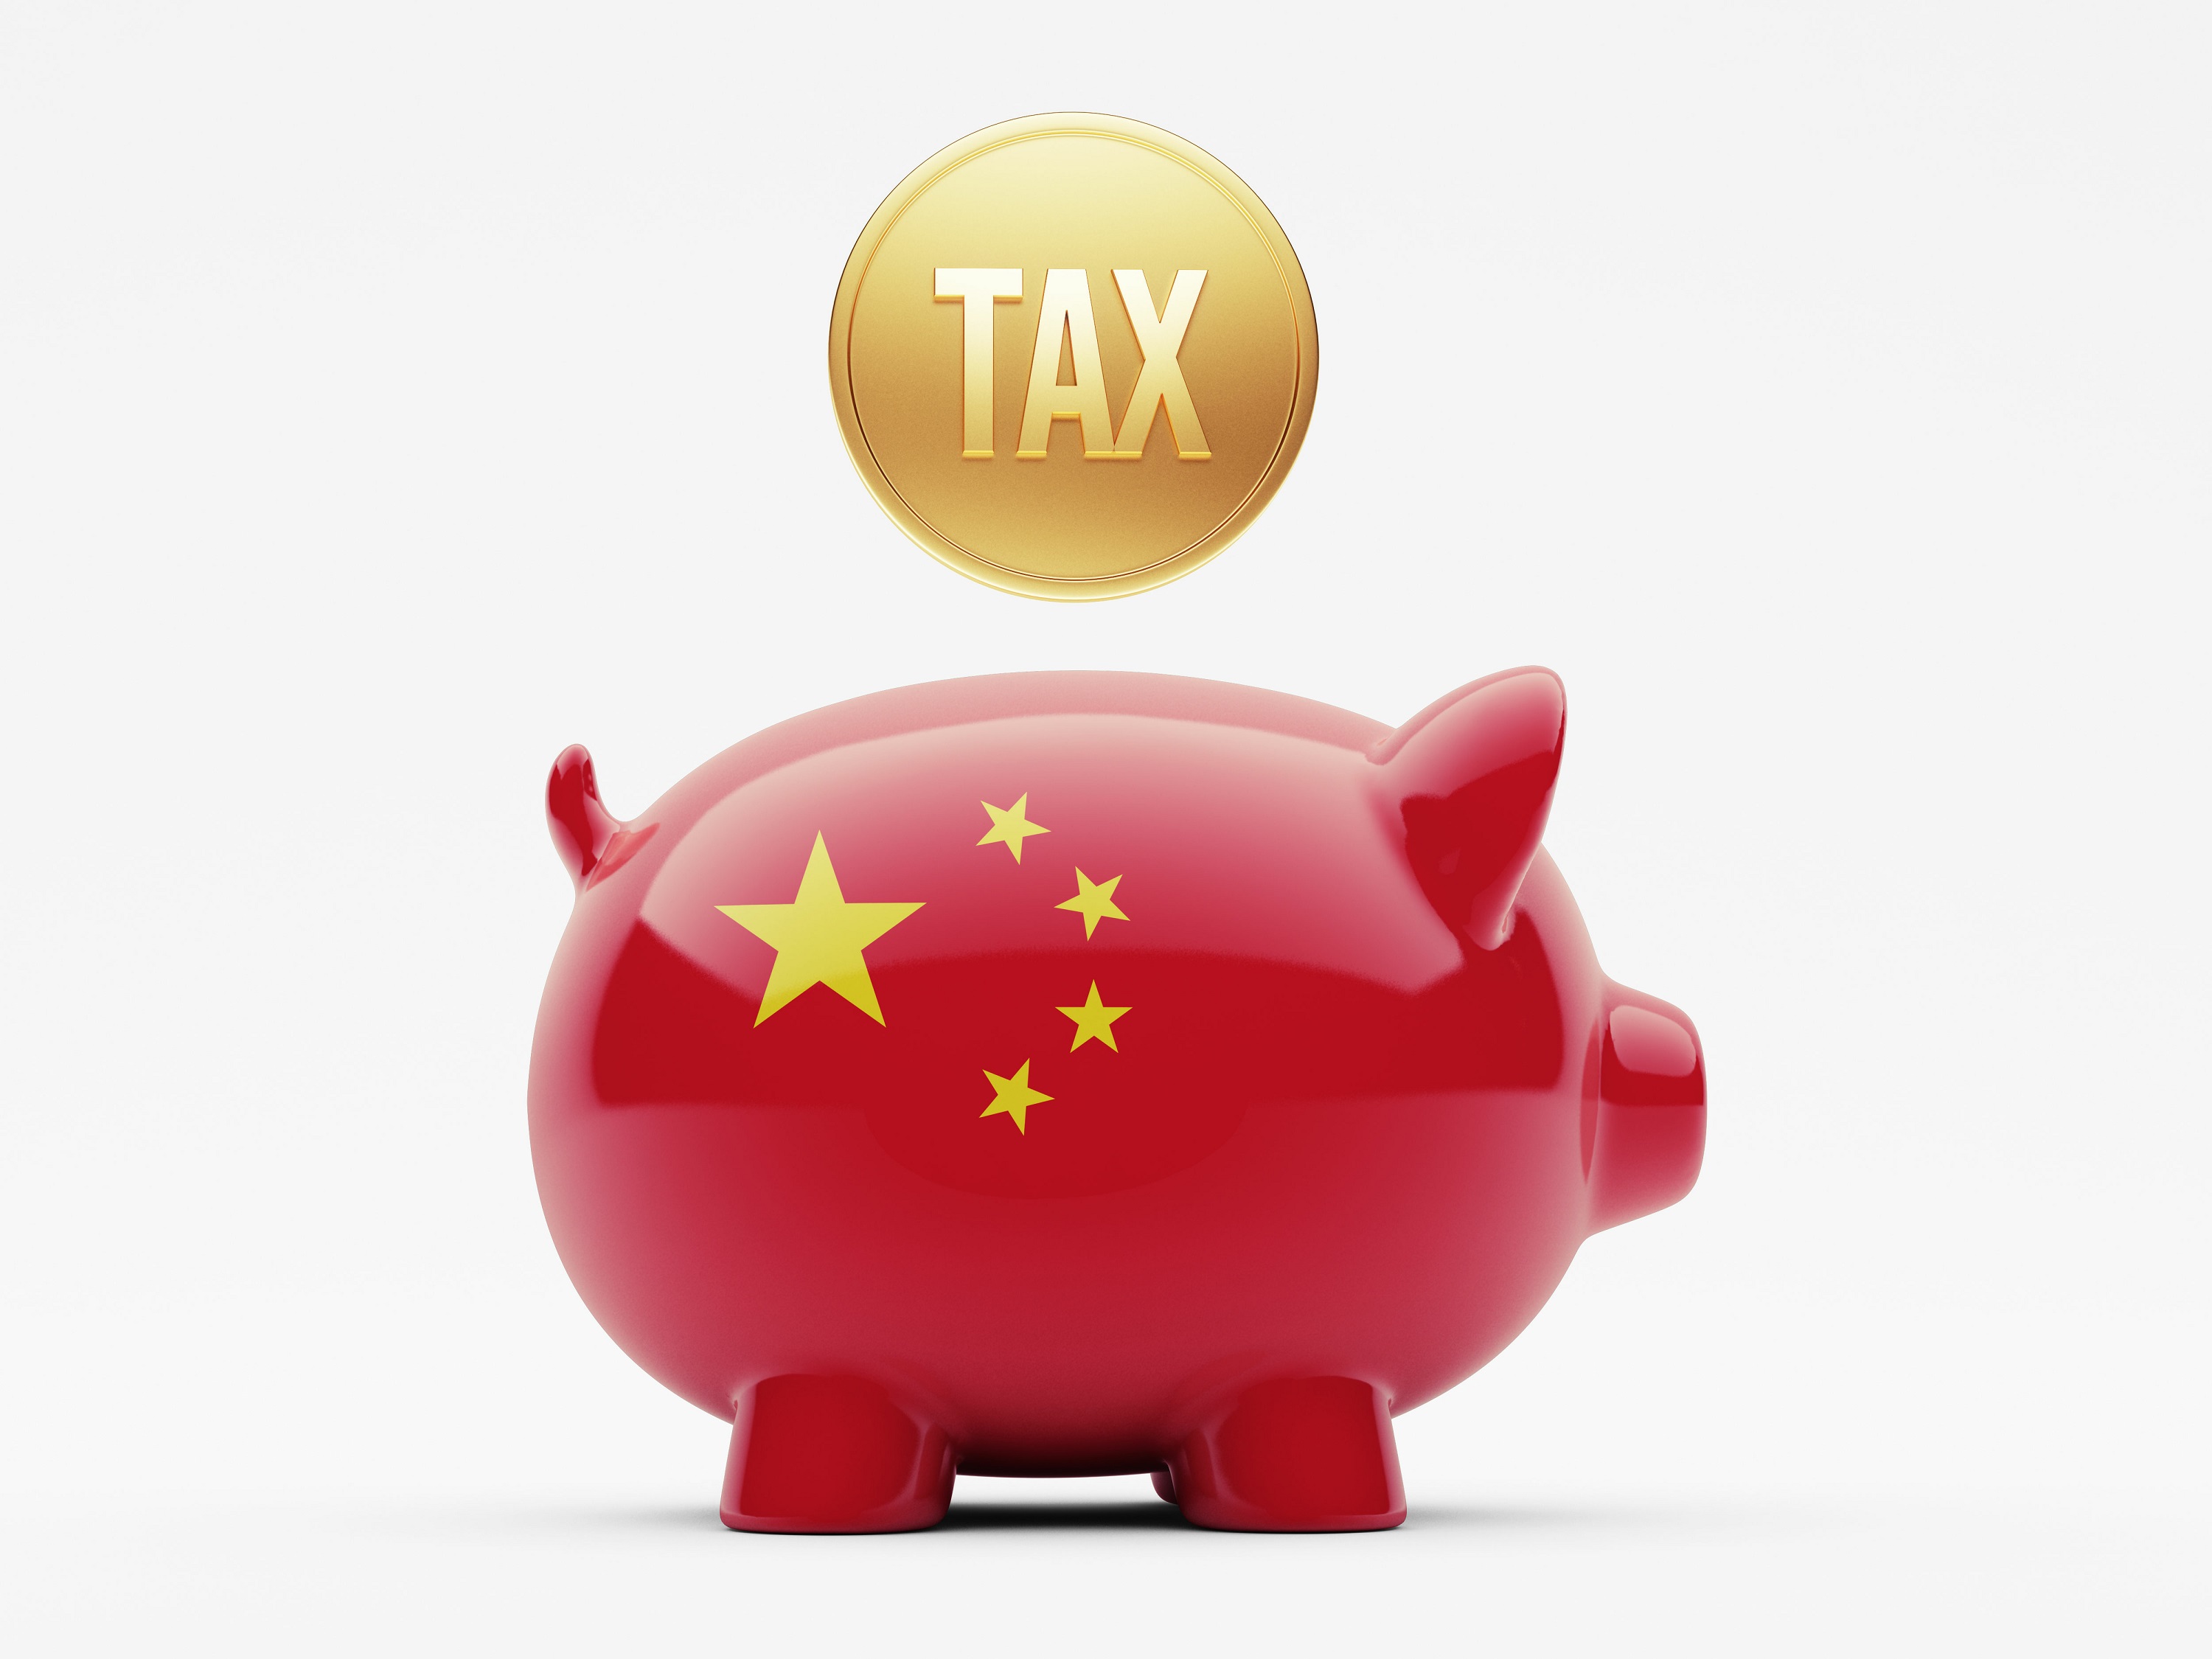 A golden coin with the word “tax” on it hangs above a piggy bank decorated in the colors of the Chinese flag.